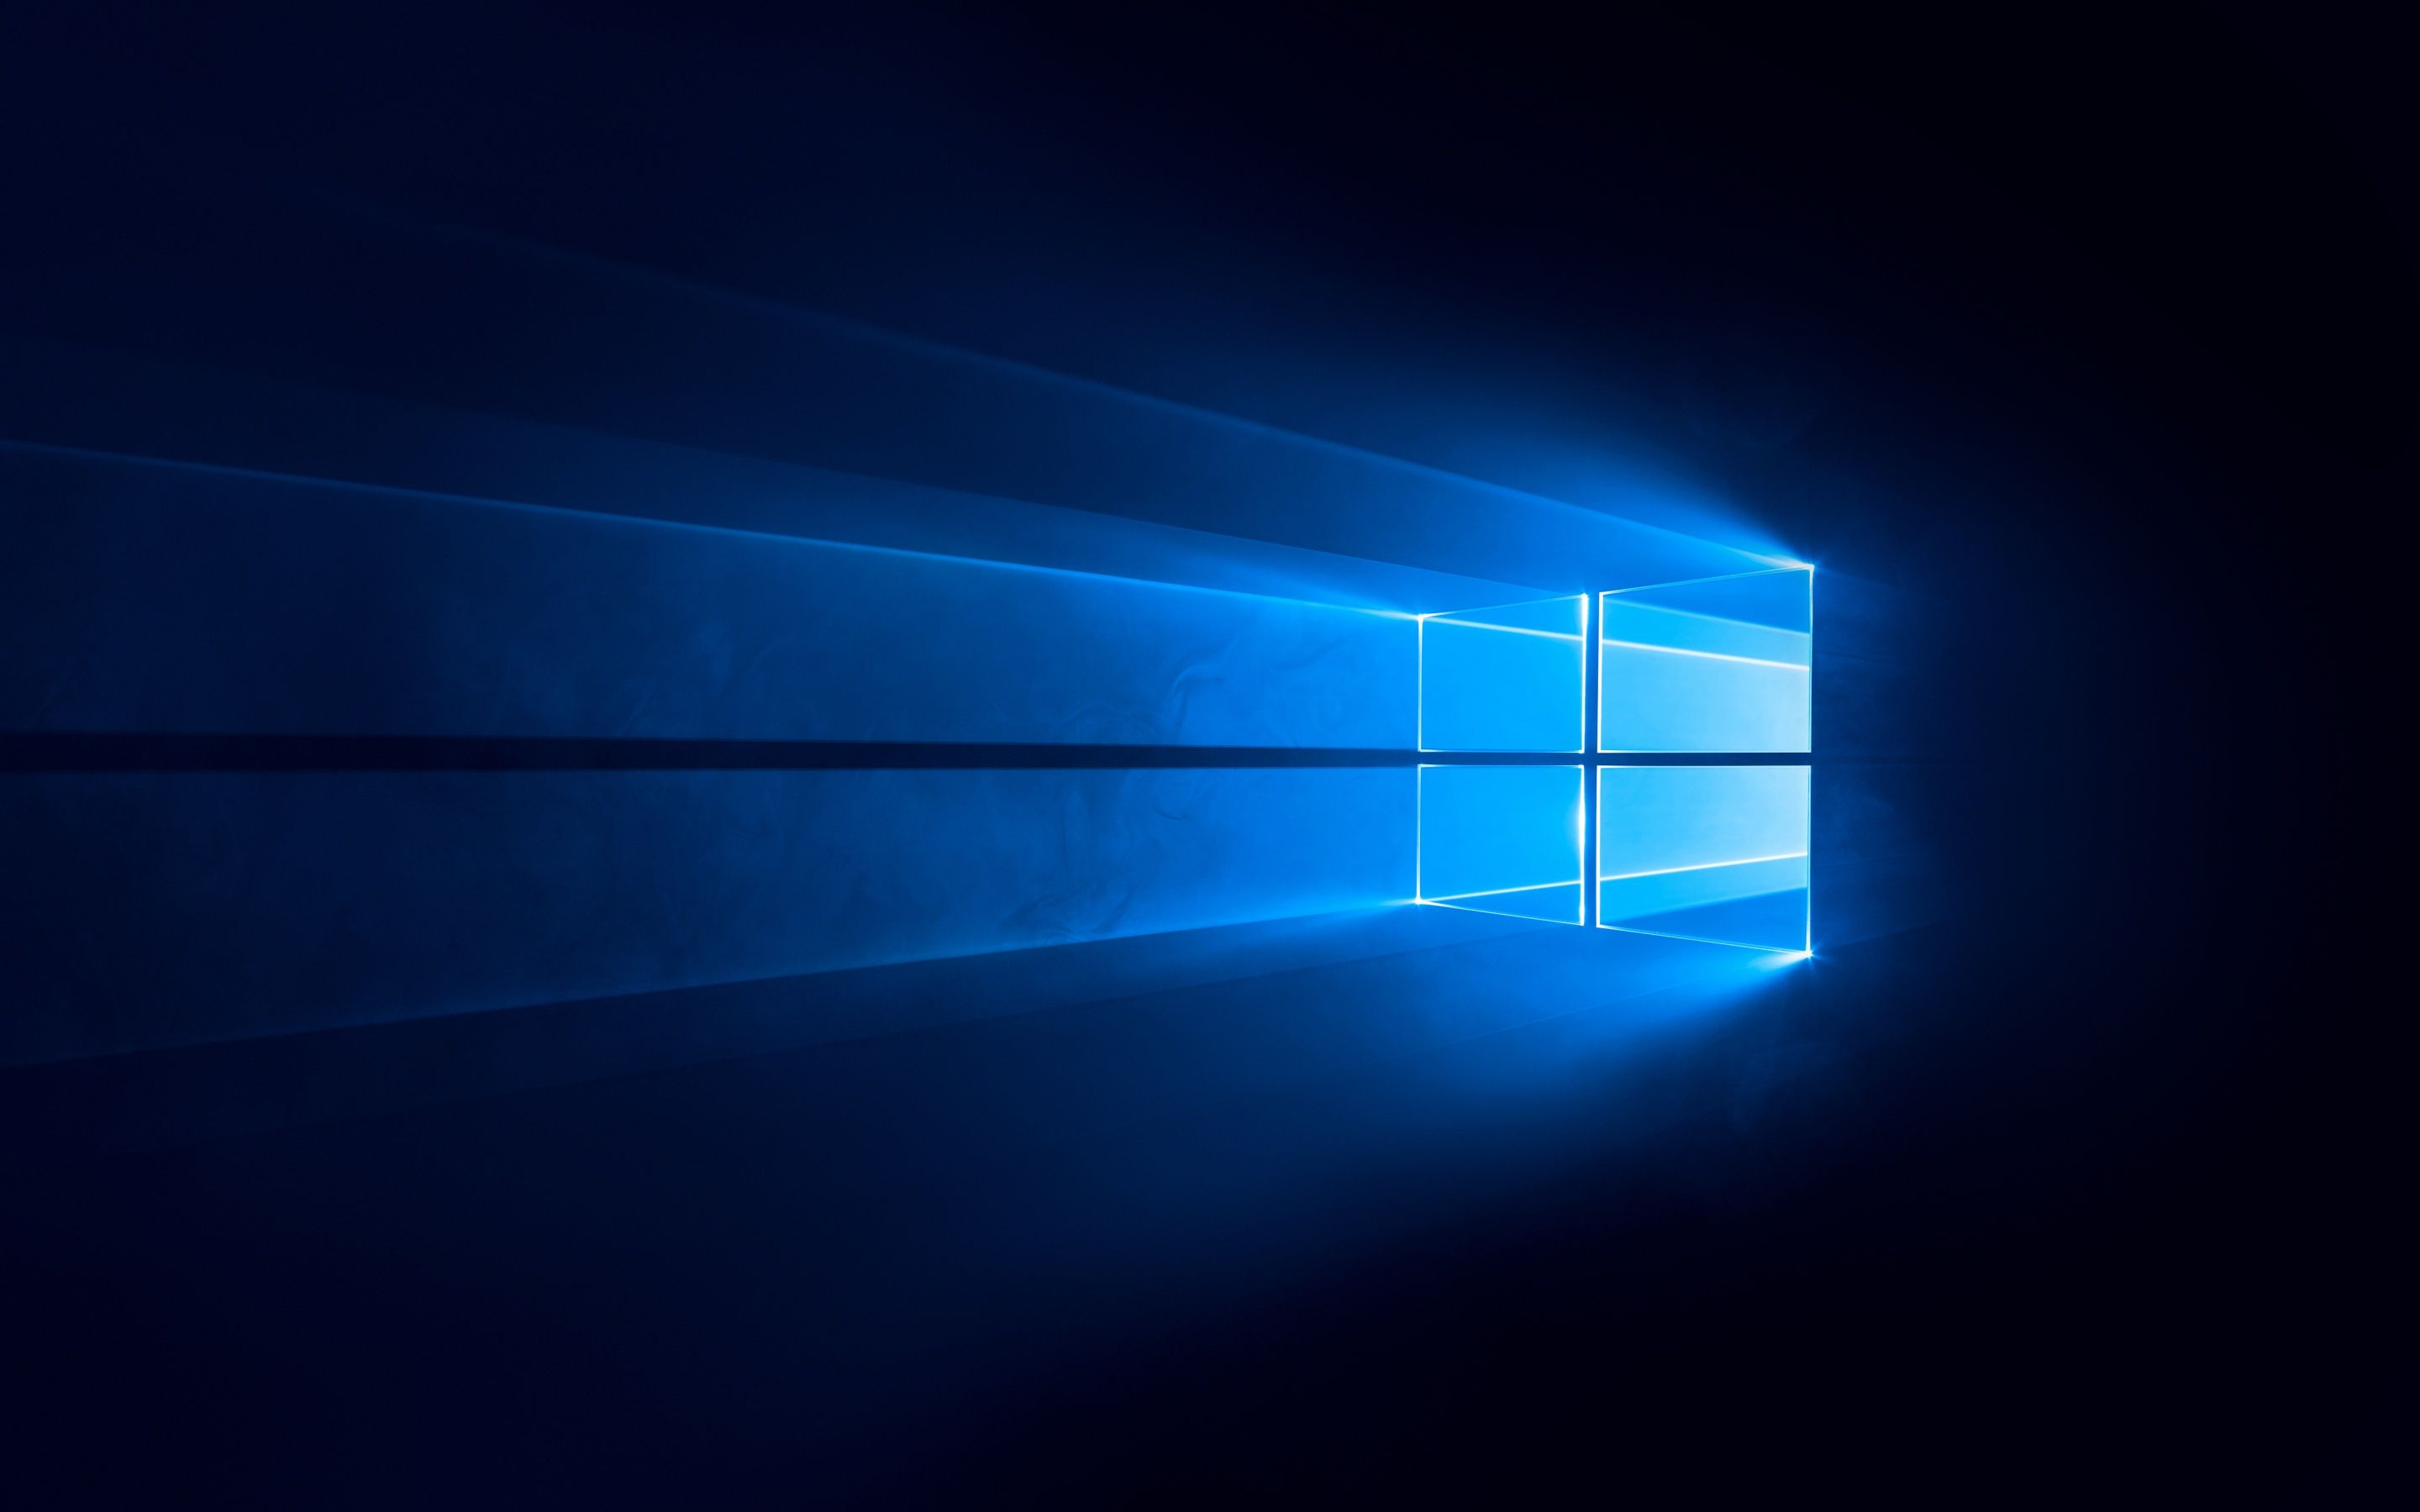 Windows 10 wallpaper, blue, with a reflection of the logo - Windows 10